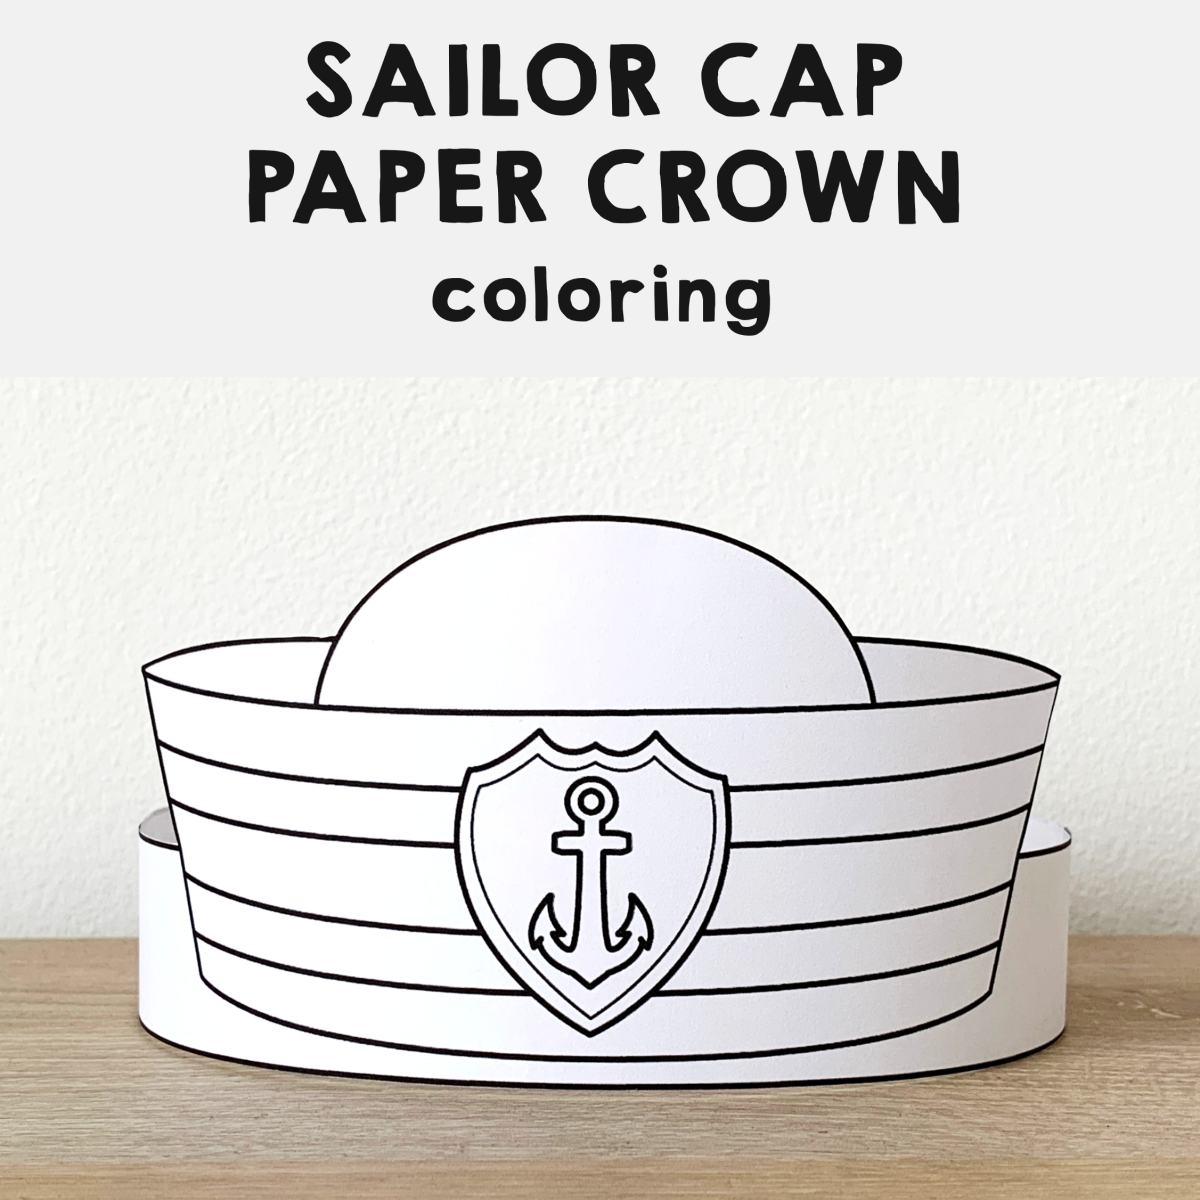 Sailor cap hat paper crown printable coloring craft activity made by teachers